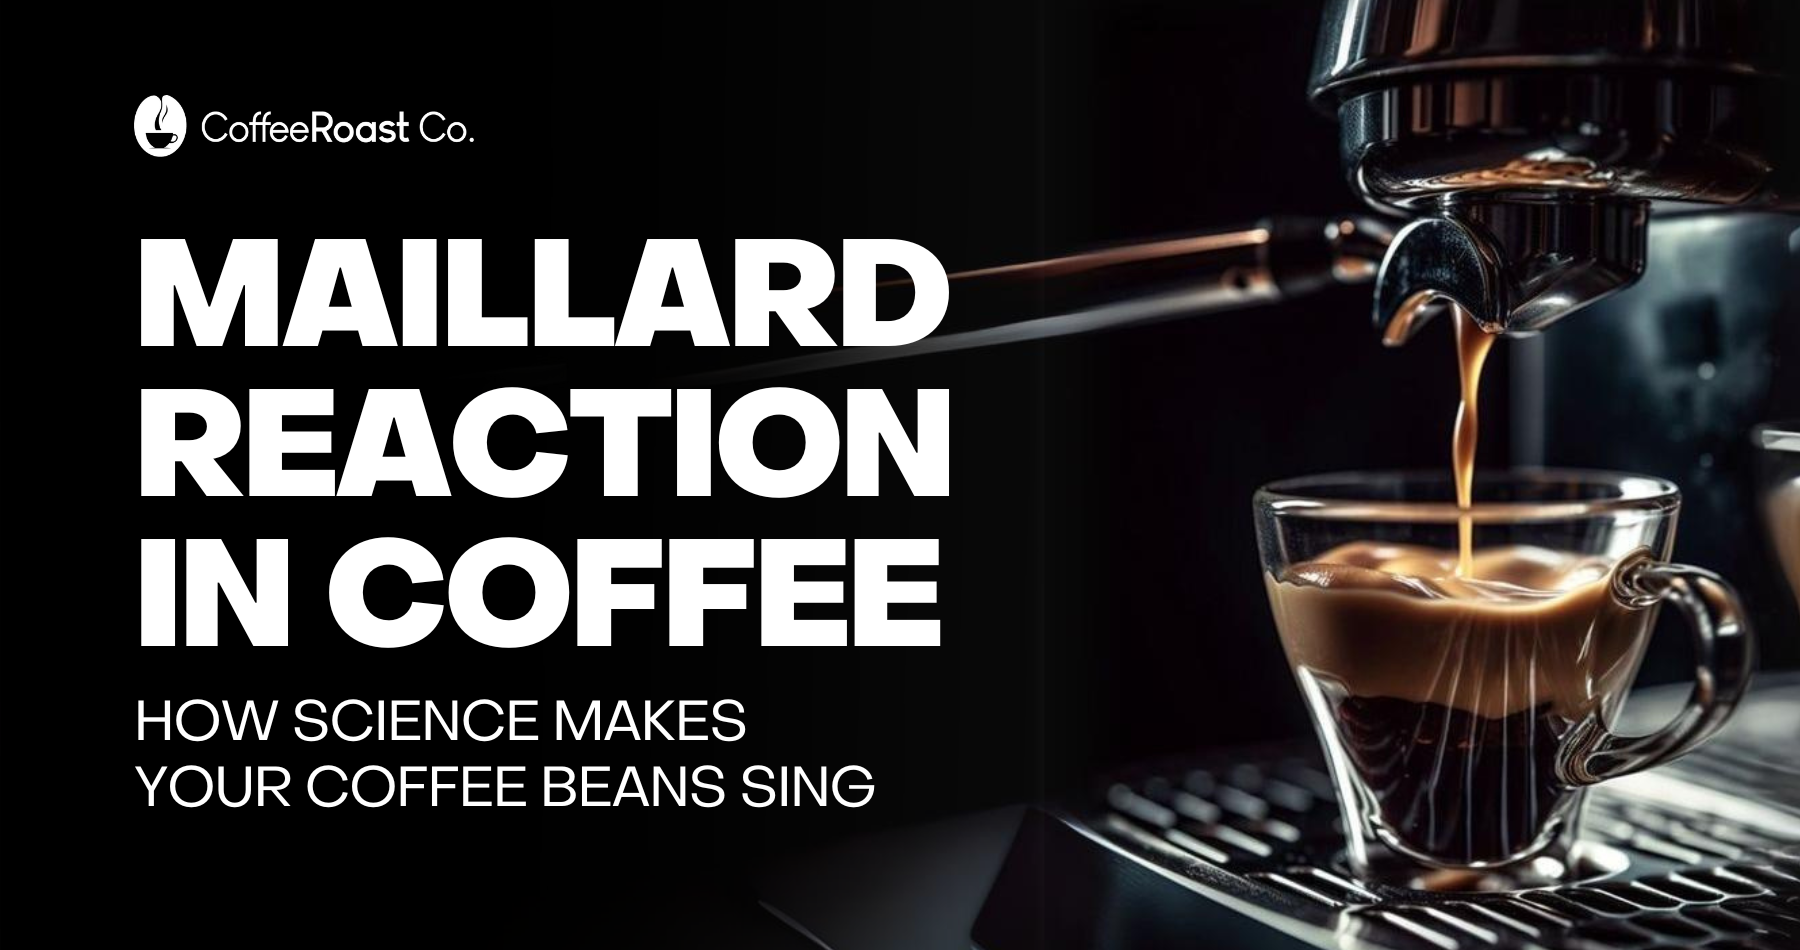 The Maillard Reaction in Coffee: How Science Makes Your Coffee Beans Sing